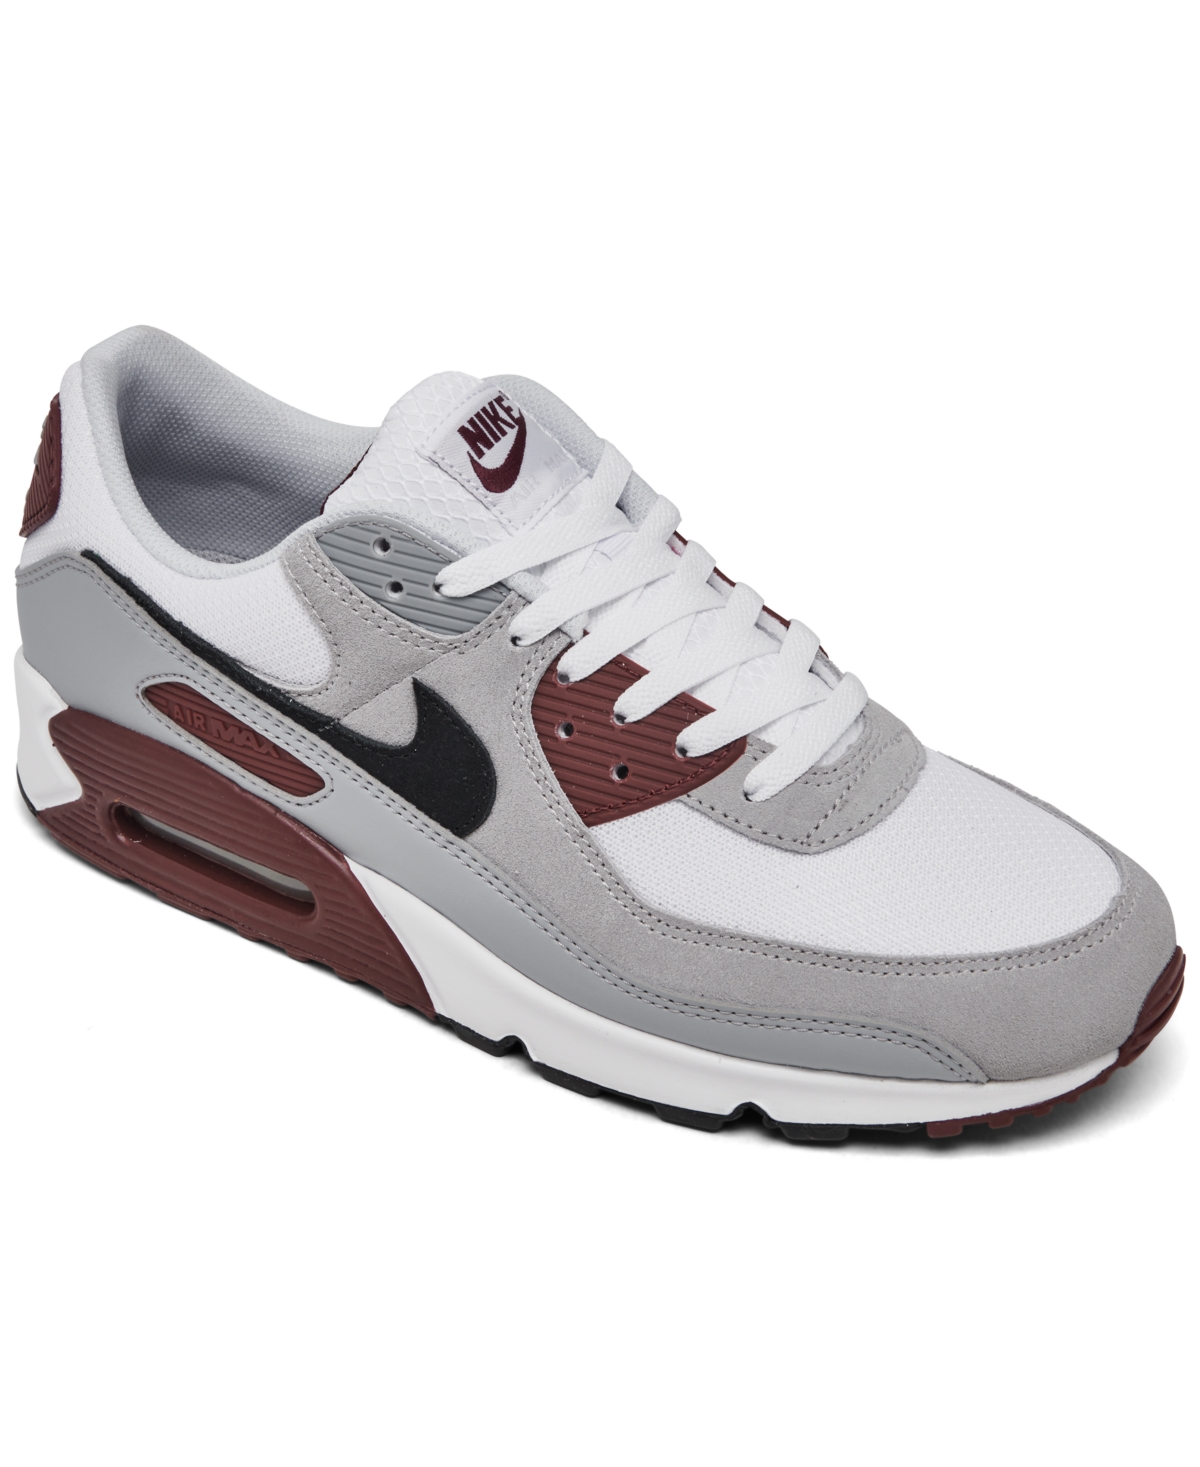 Men's Air Max 90 Casual Sneakers from Finish Line - White/blac